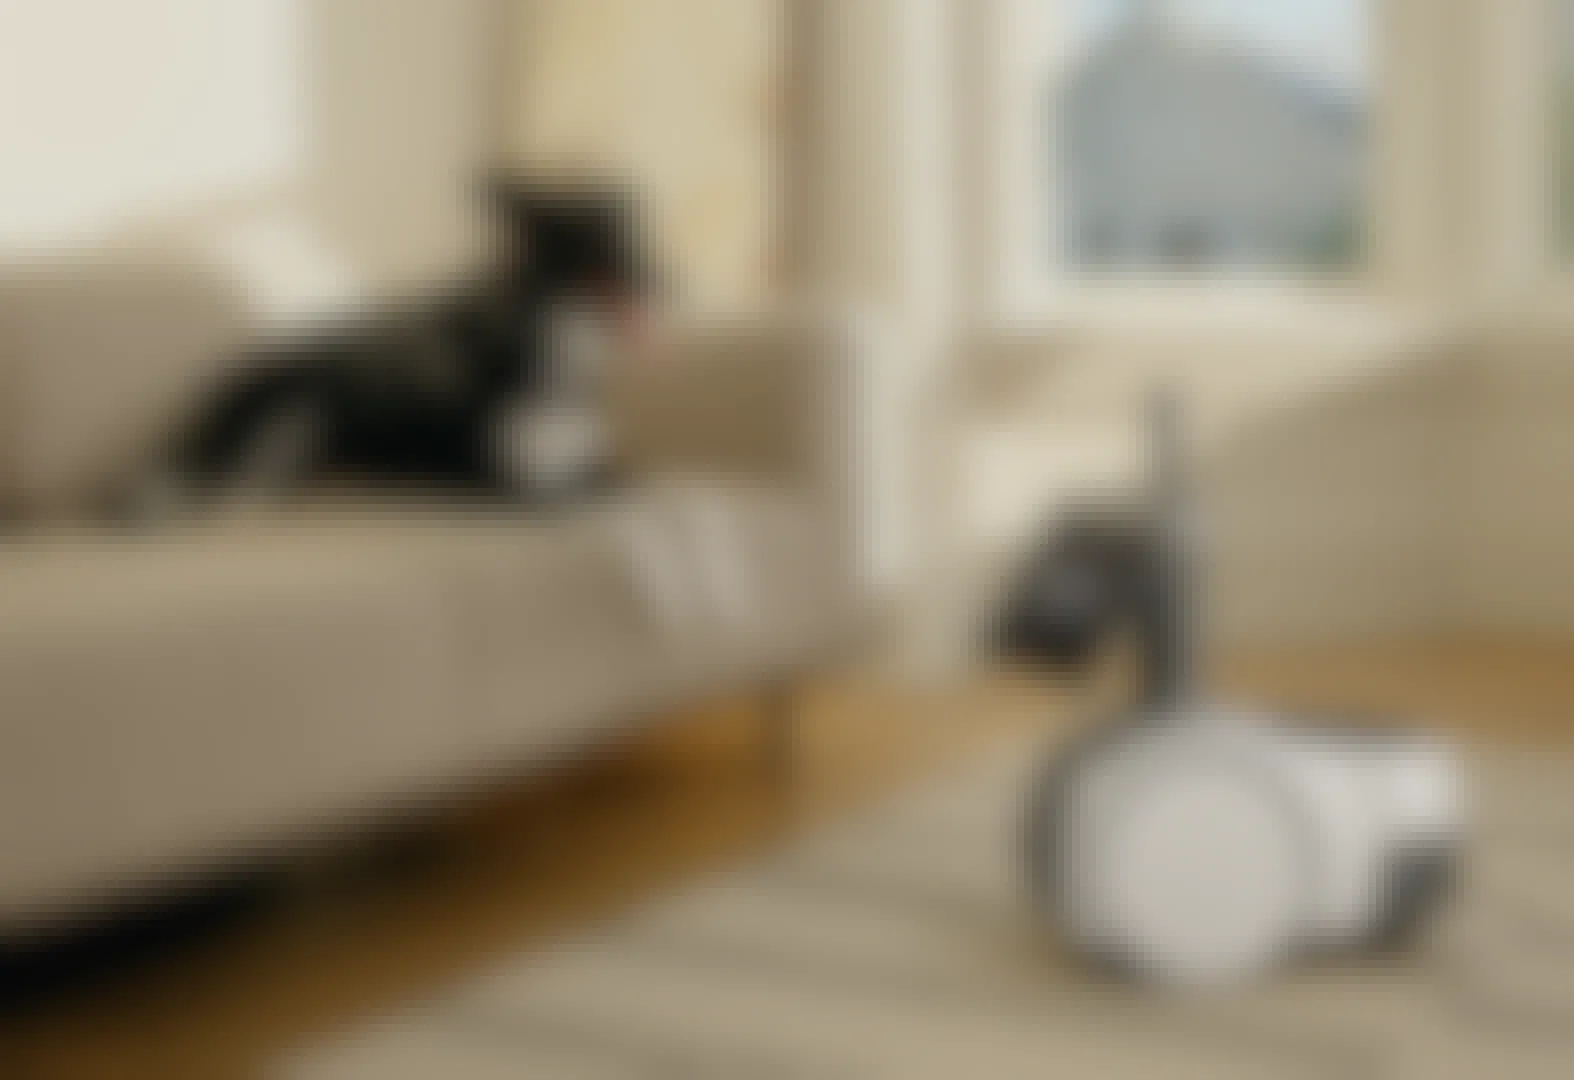 A dog laying on a couch next to an Amazon Astro device on the floor.